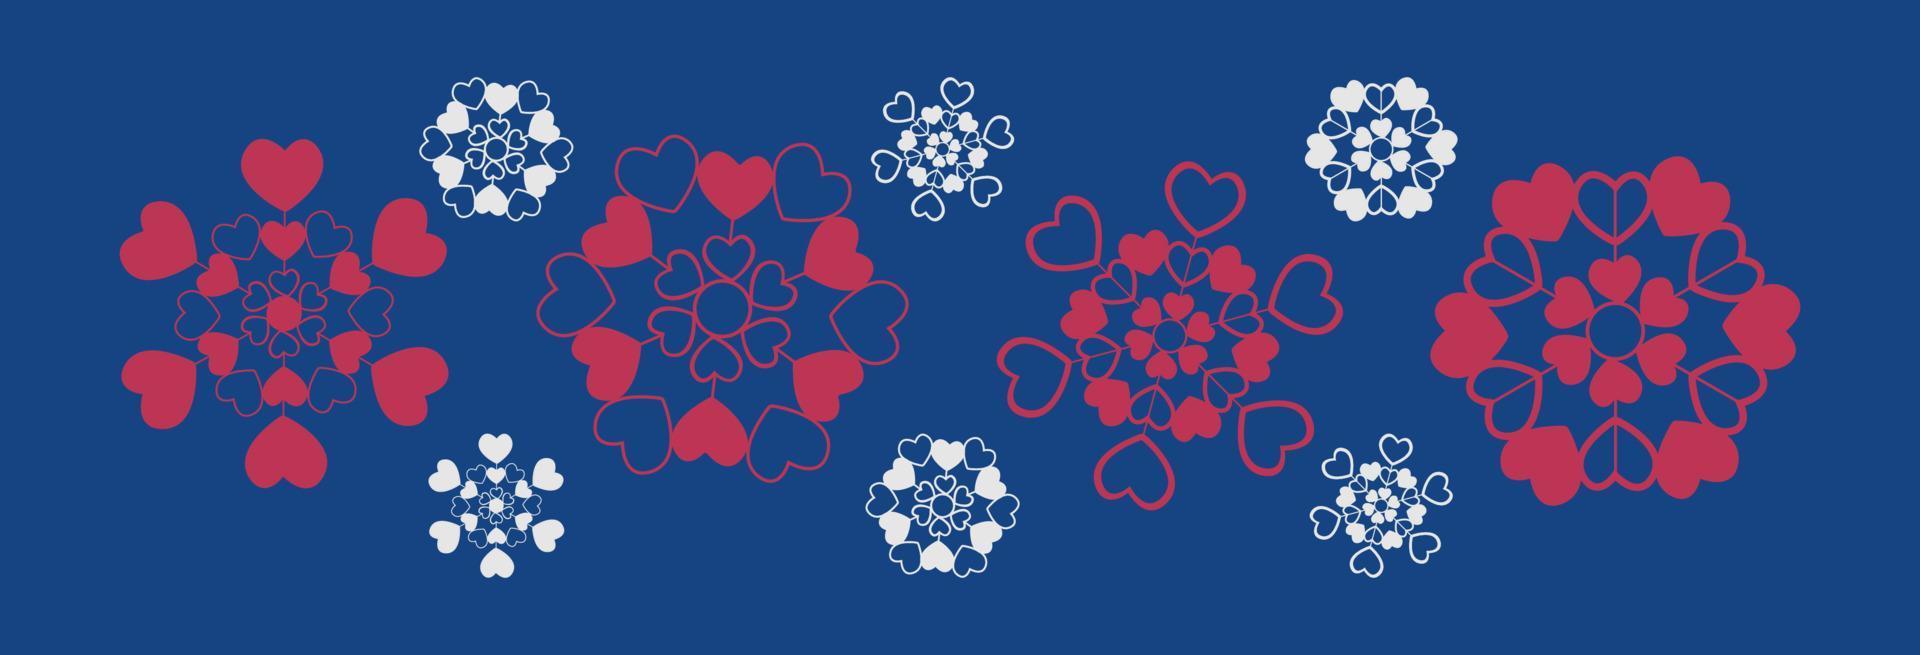 Vector snowflake heart in color magenta and white on a dark blue background